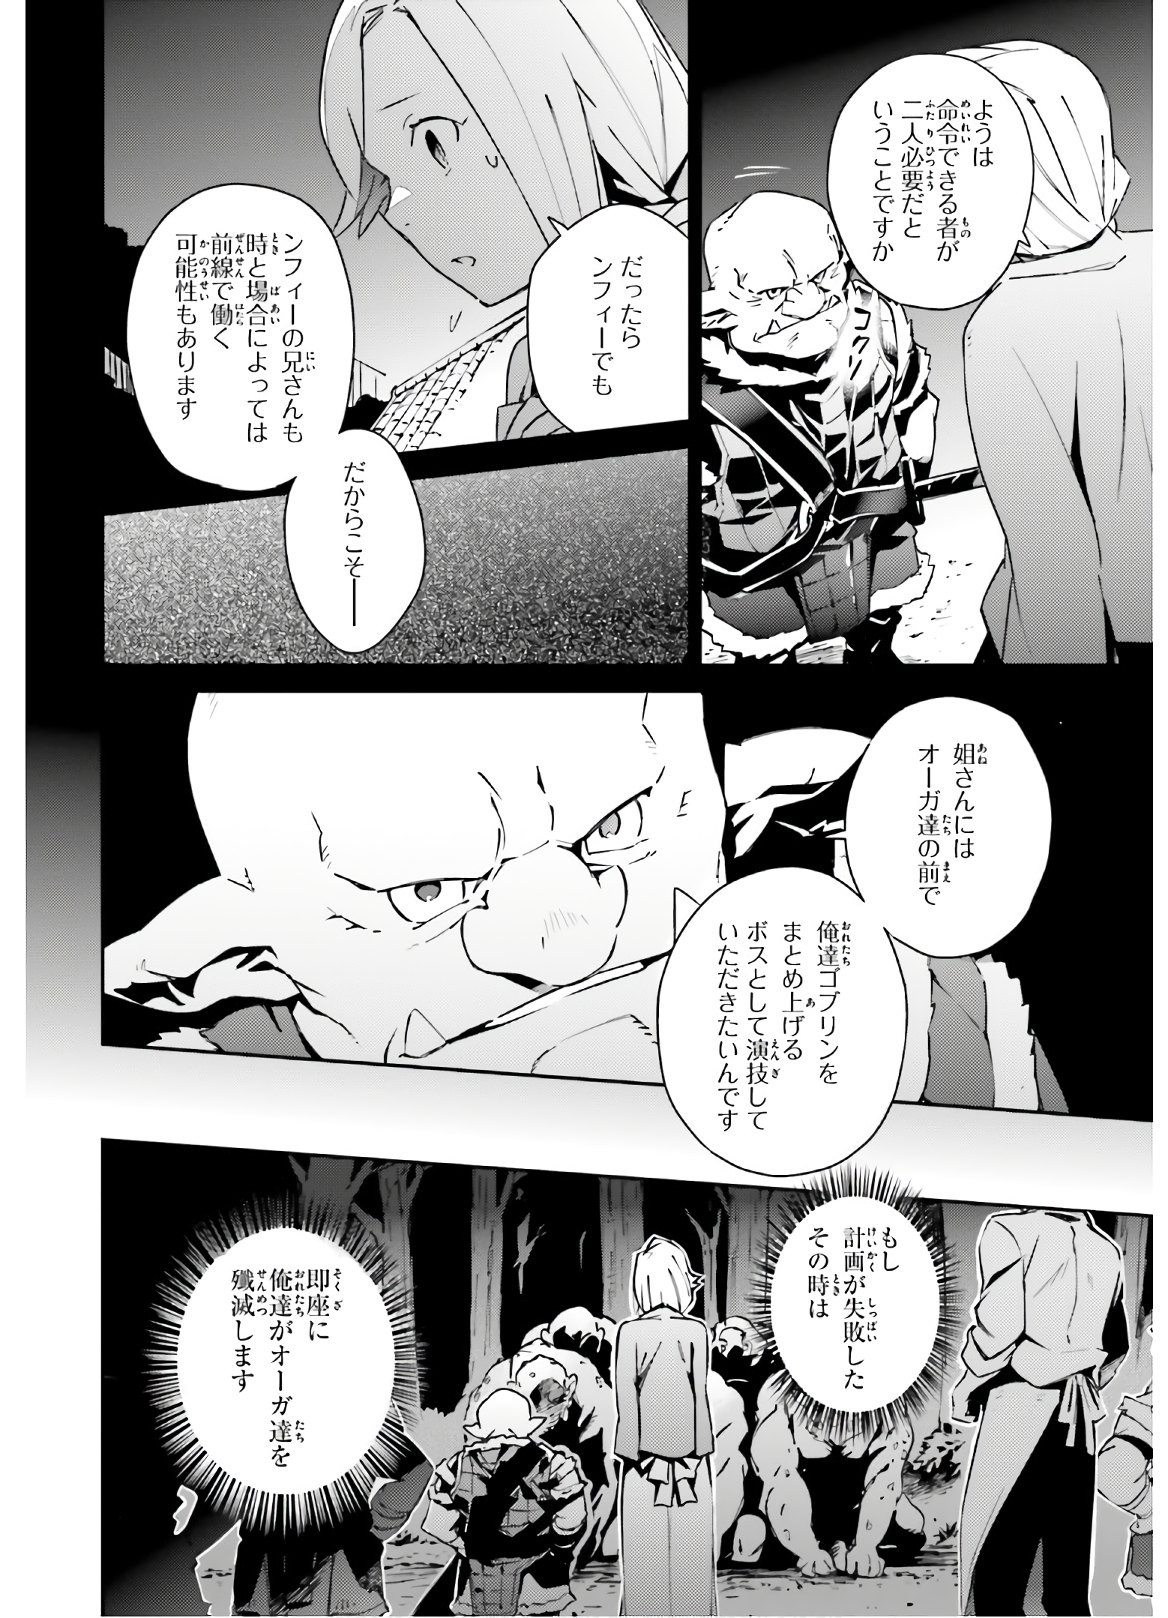 Overlord - Chapter 56 - Page 2